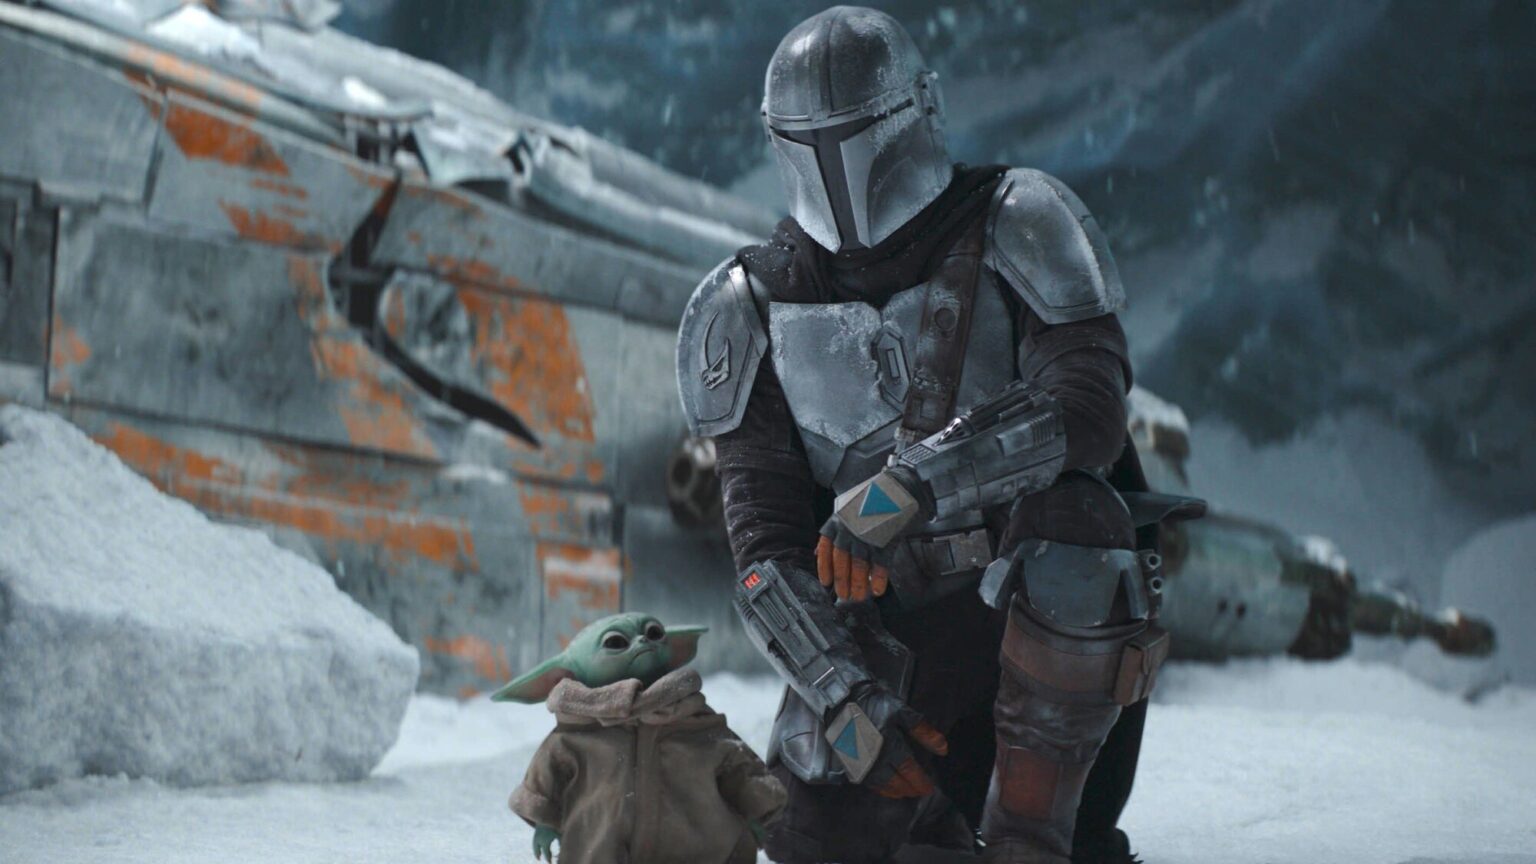 We're getting a little worried about 'The Mandalorian' in it the second season. The show is staring to feel a bit boring.